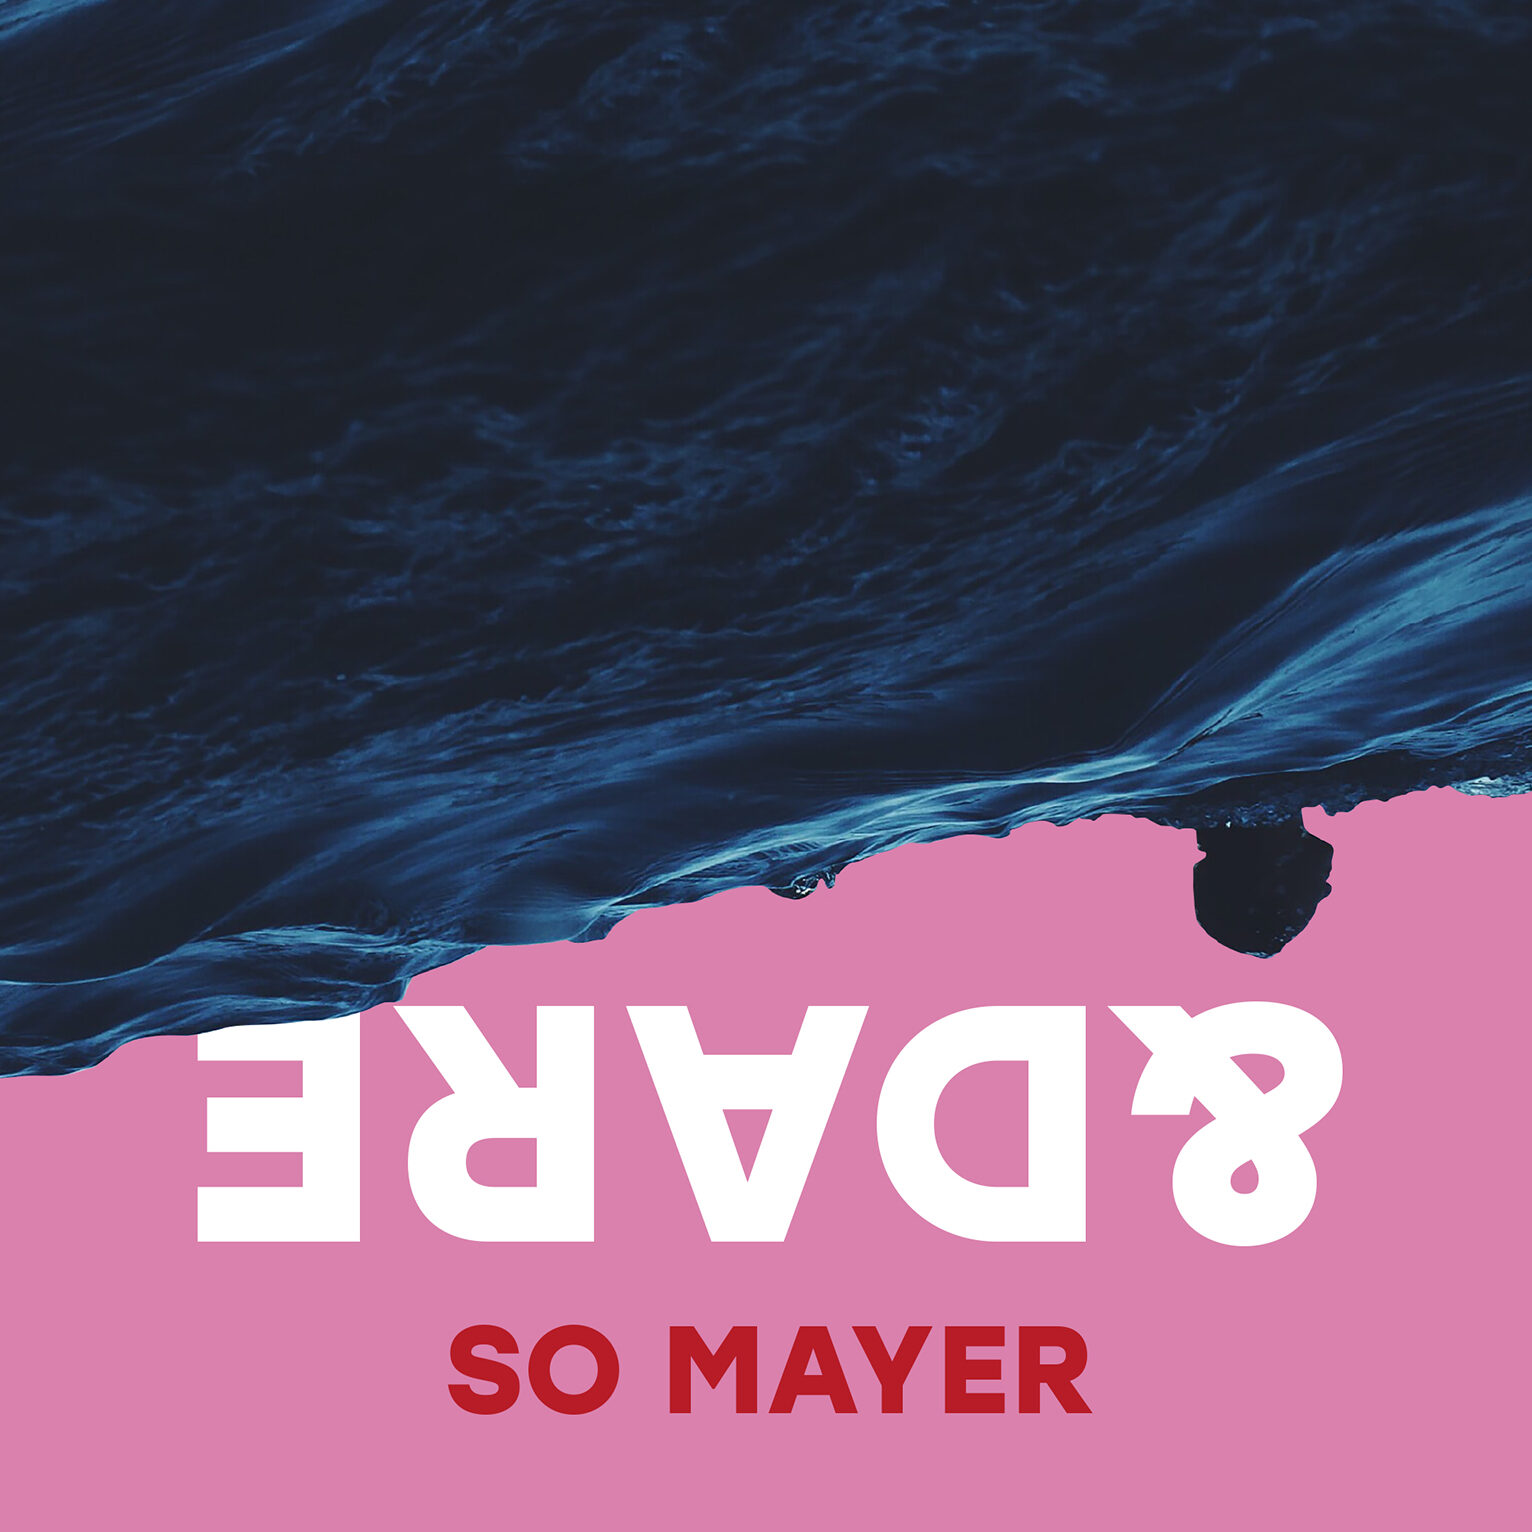 Book cover with the words & DARE written upside down at the bottom of the image, in white text on a millennial pink background. Running at a diagonal through the middle of the image is a thick band of turbulent water. At the bottom right corner, a swimmer's head is visible raised above the waves. At the very bottom of the image is the name So Mayer, in red.